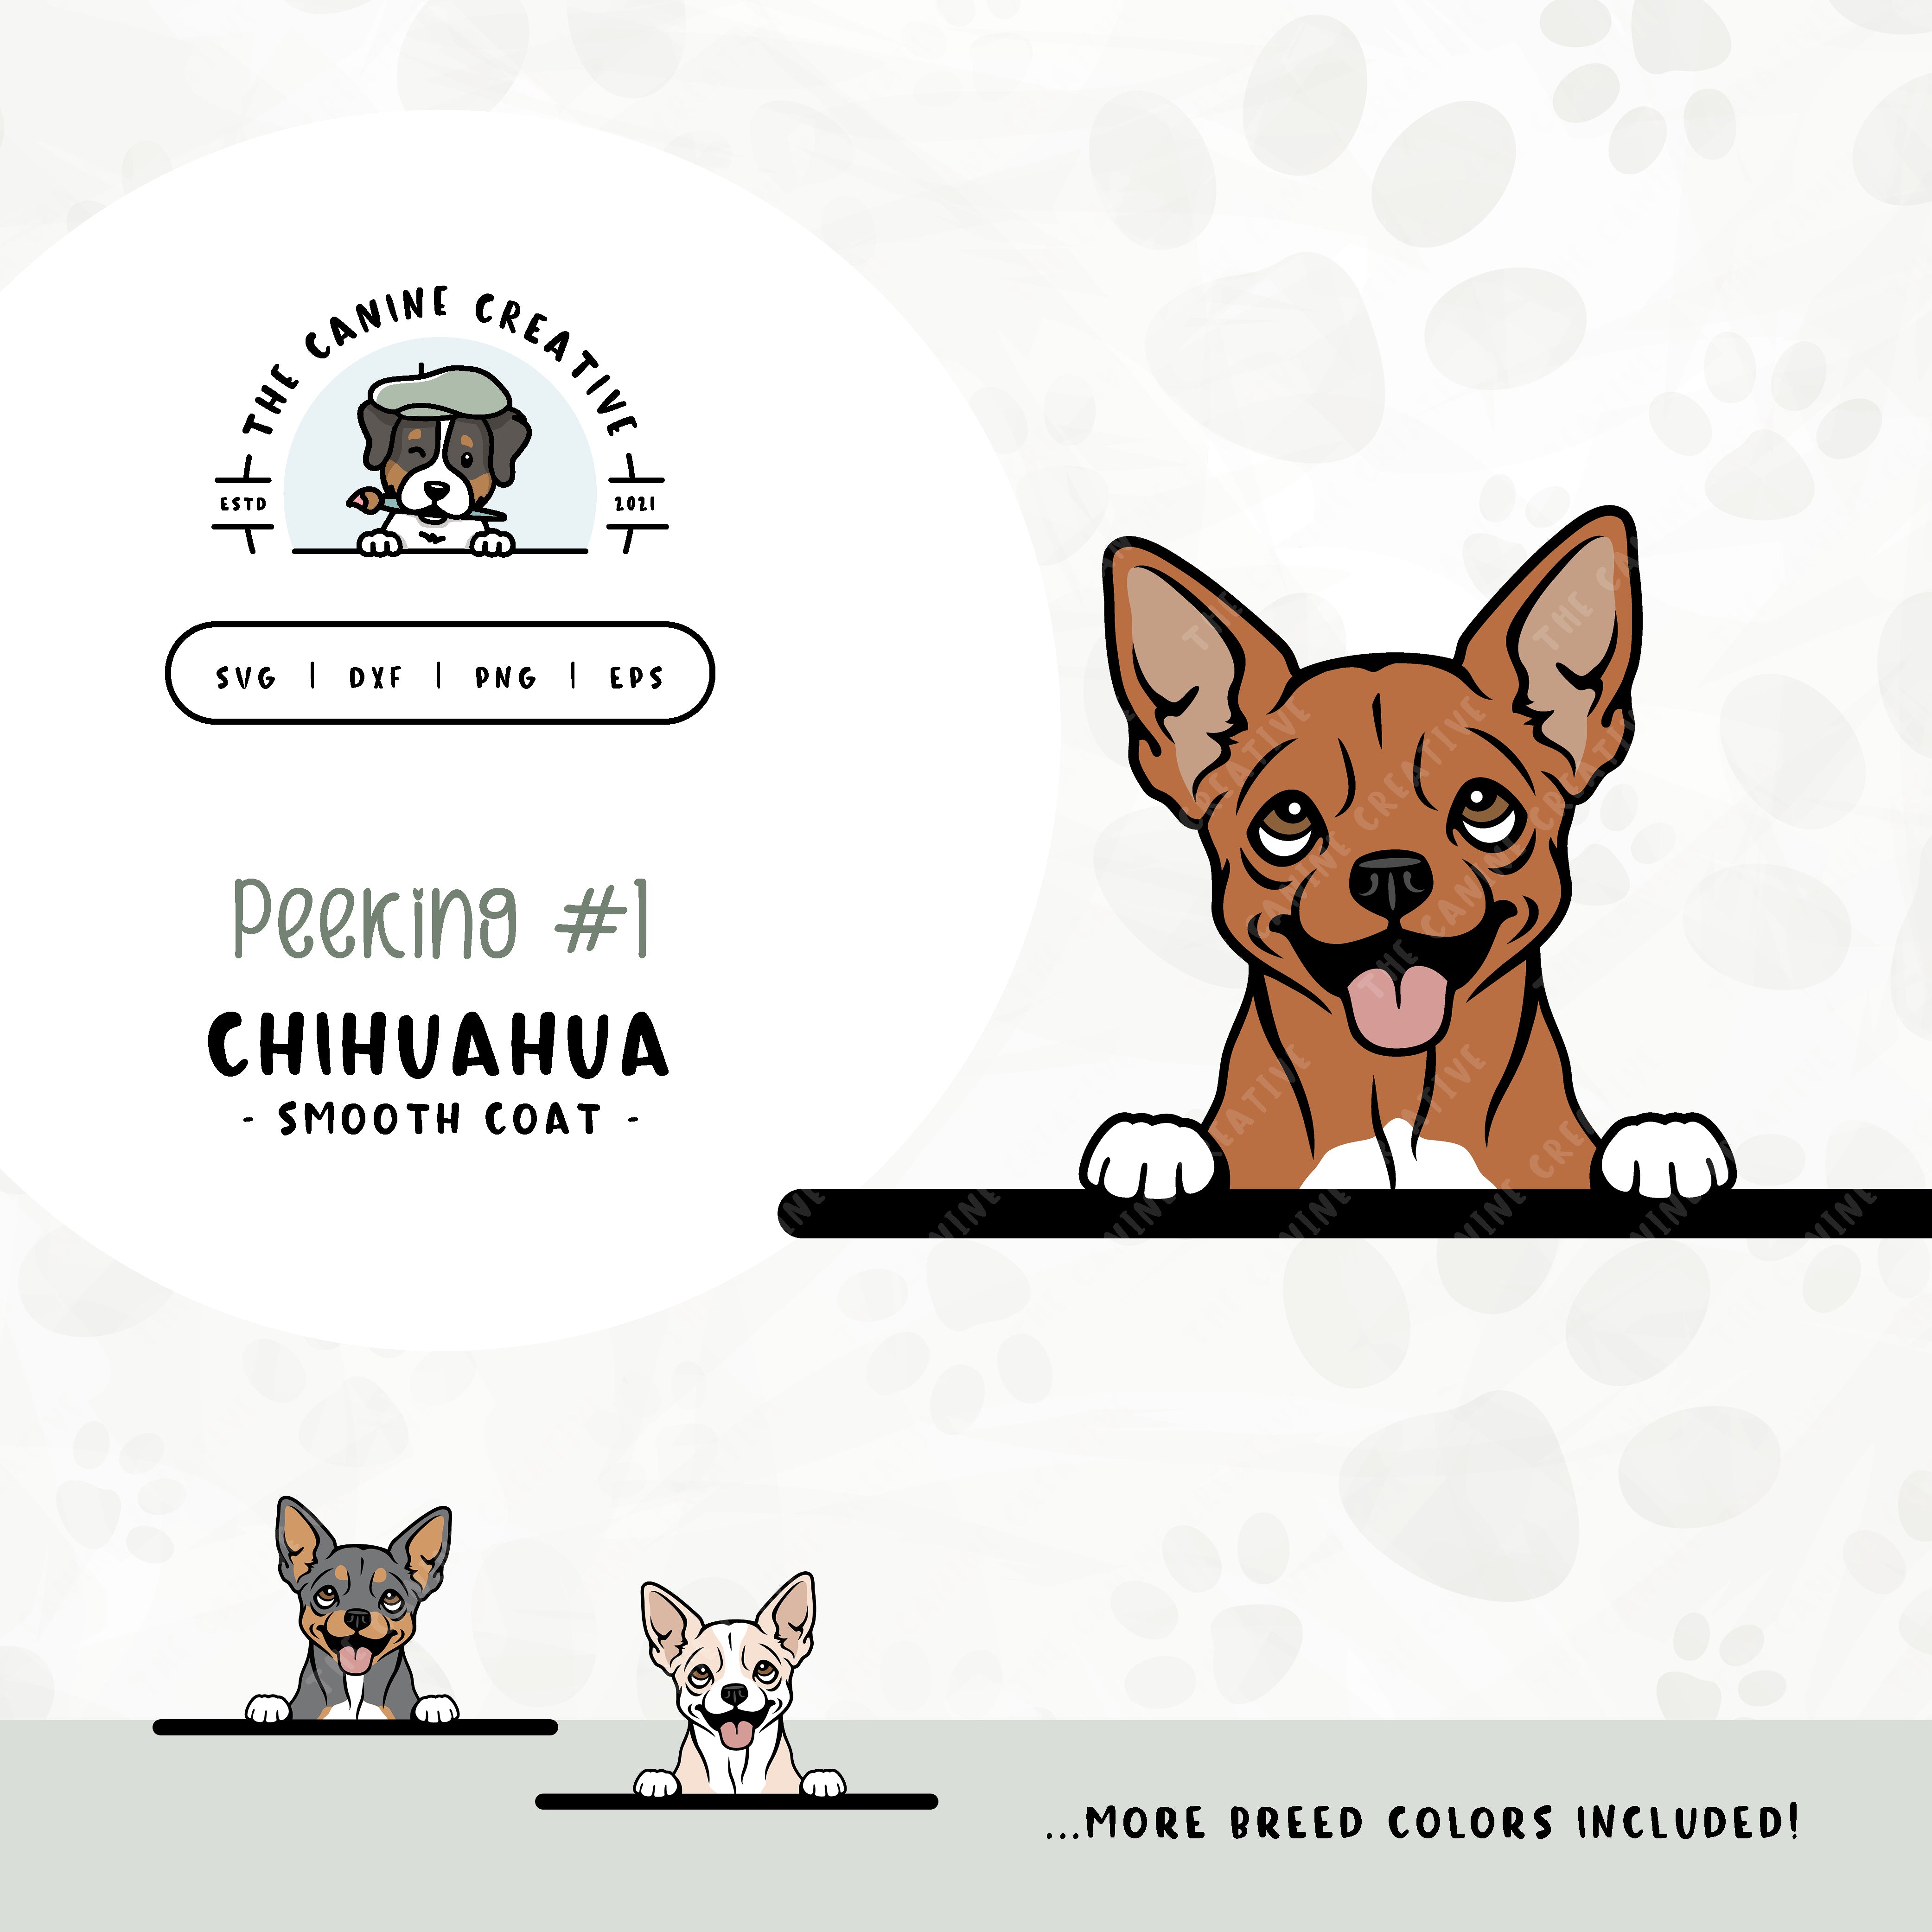 This illustrated design features a peeking smooth coat Chihuahua. File formats include: SVG, DXF, PNG, and EPS.